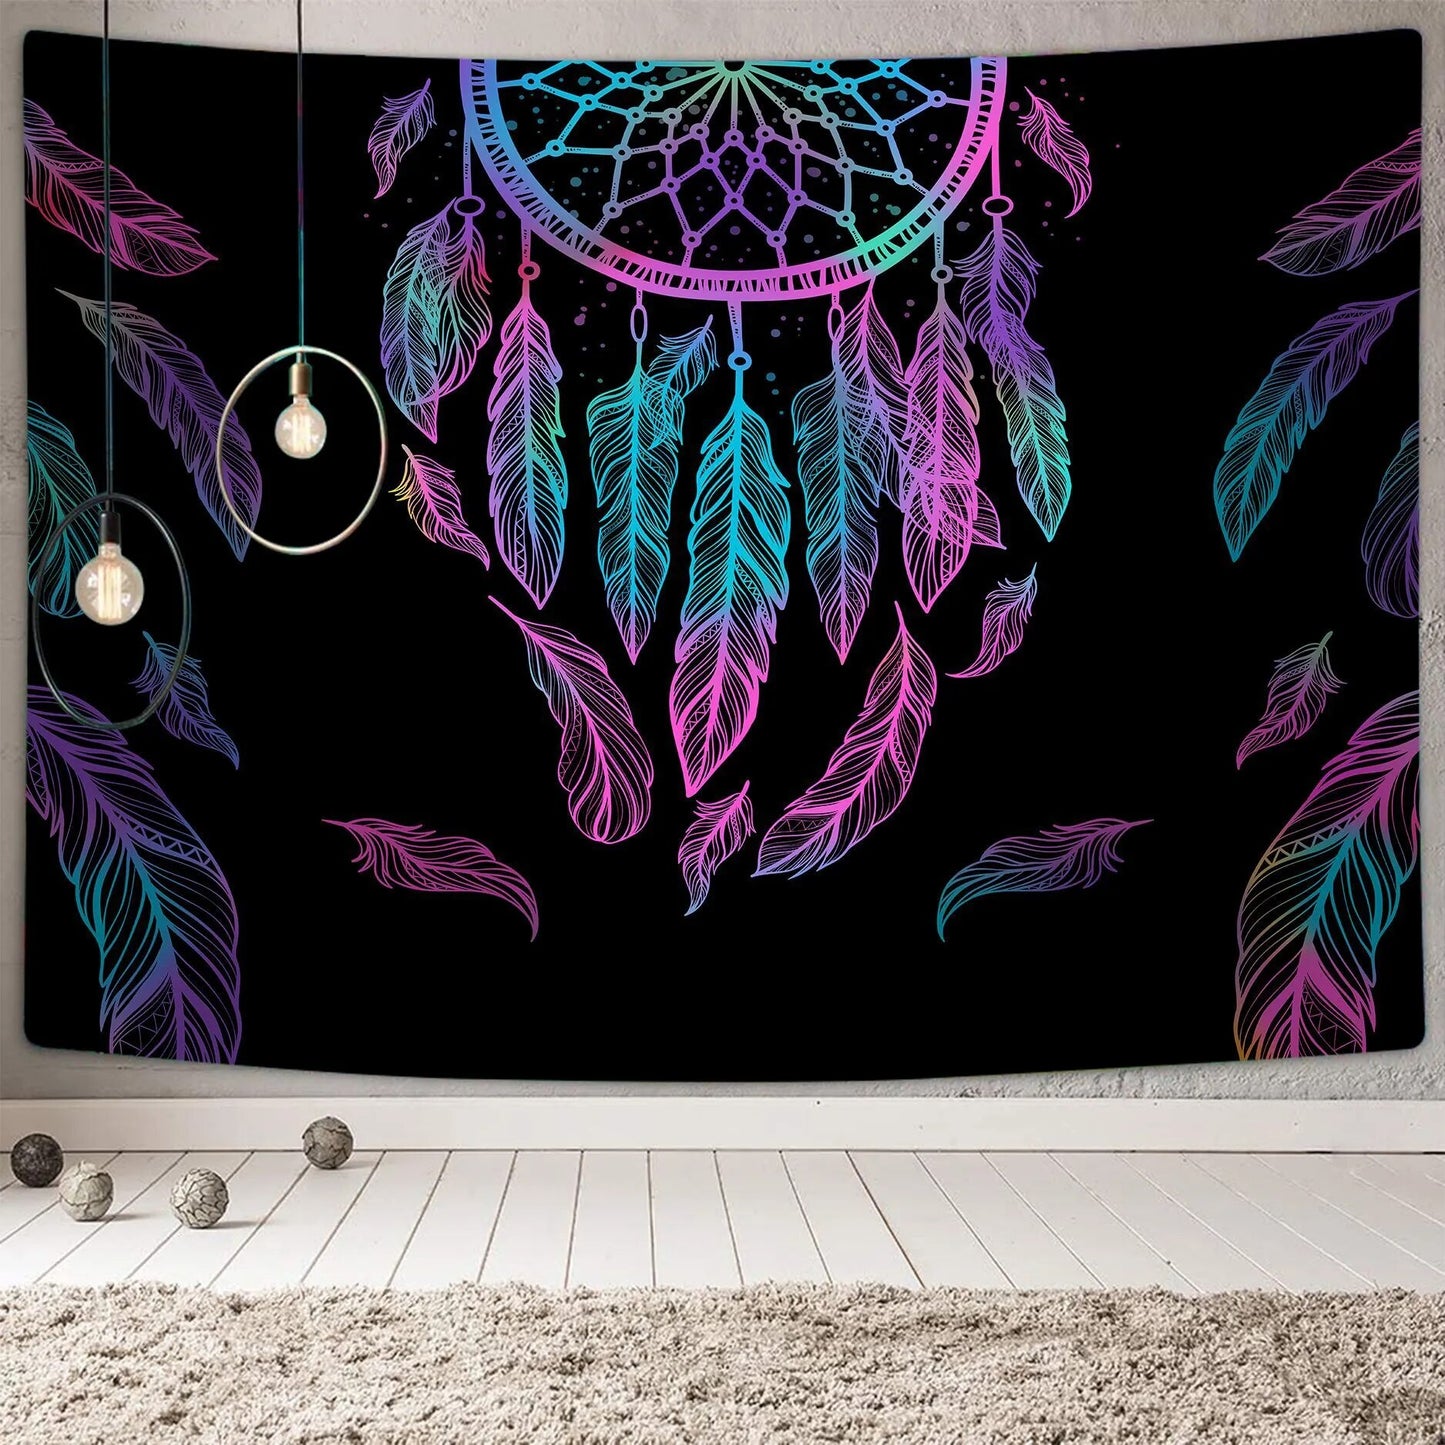 Psychedelic Moon Dreamcatcher Feather Tapestry Hippie Large Bohemian